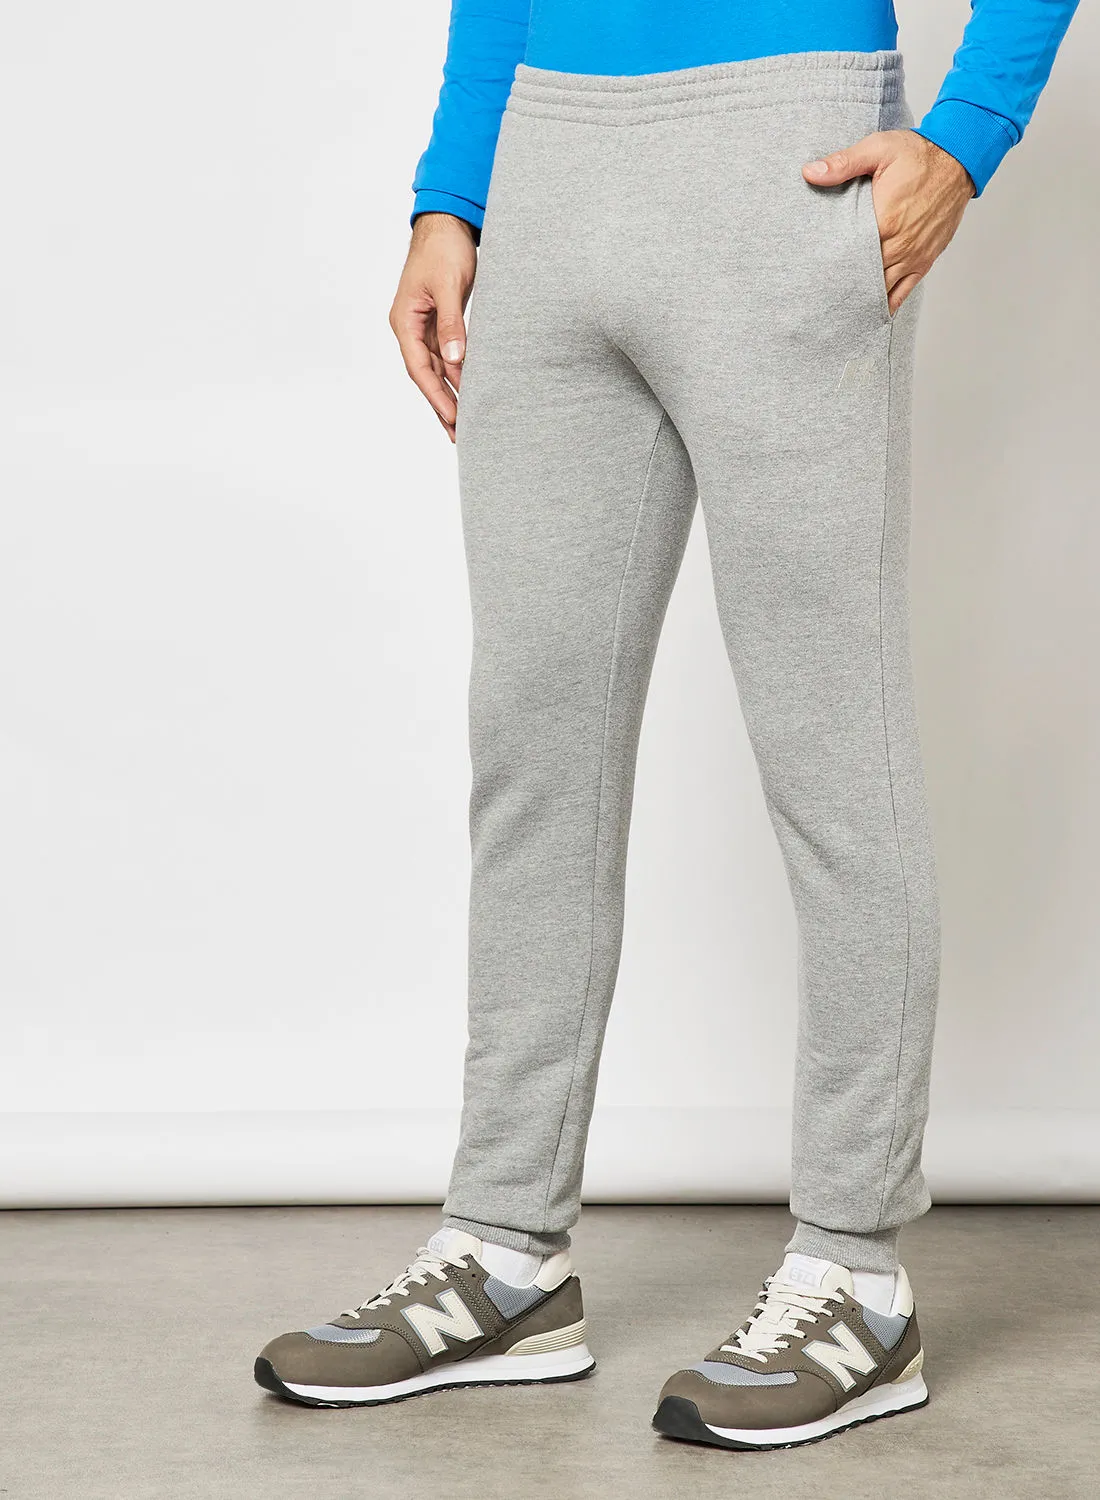 Russell Athletic Essential Sweatpants Grey